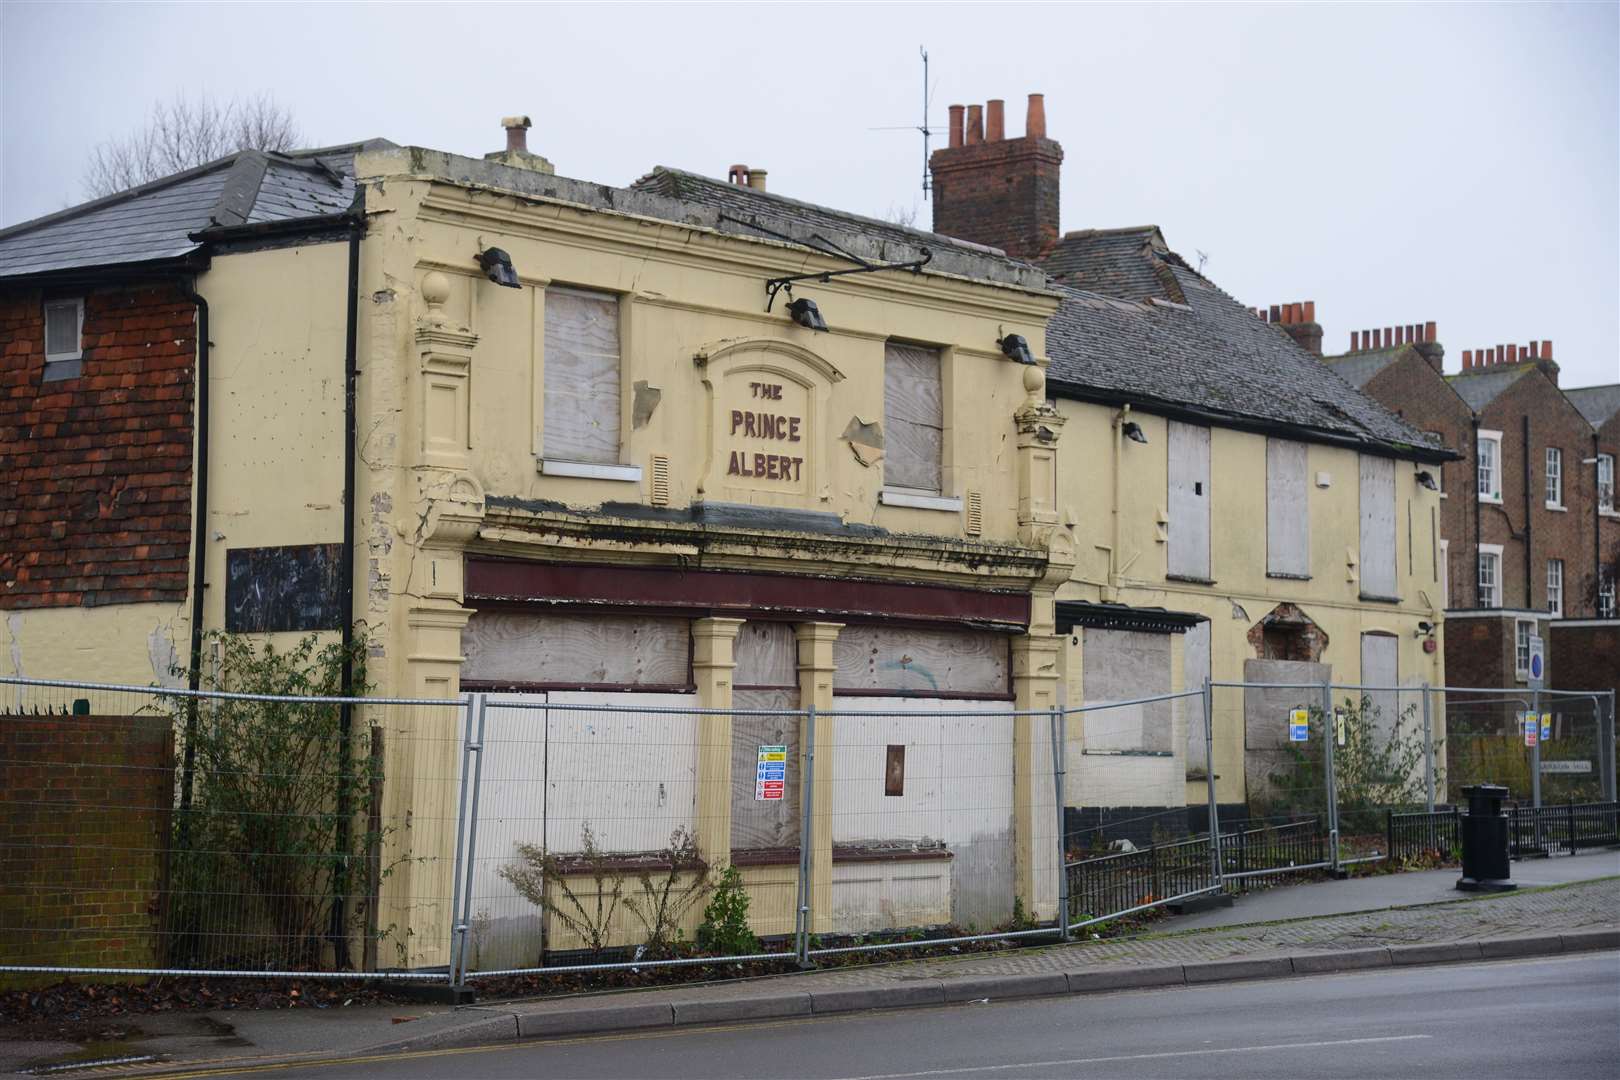 Plans for the Prince Albert Pub in Ashford were approved in 2017 and construction crews have been working on the five-storey block since 2018. Picture: Gary Browne